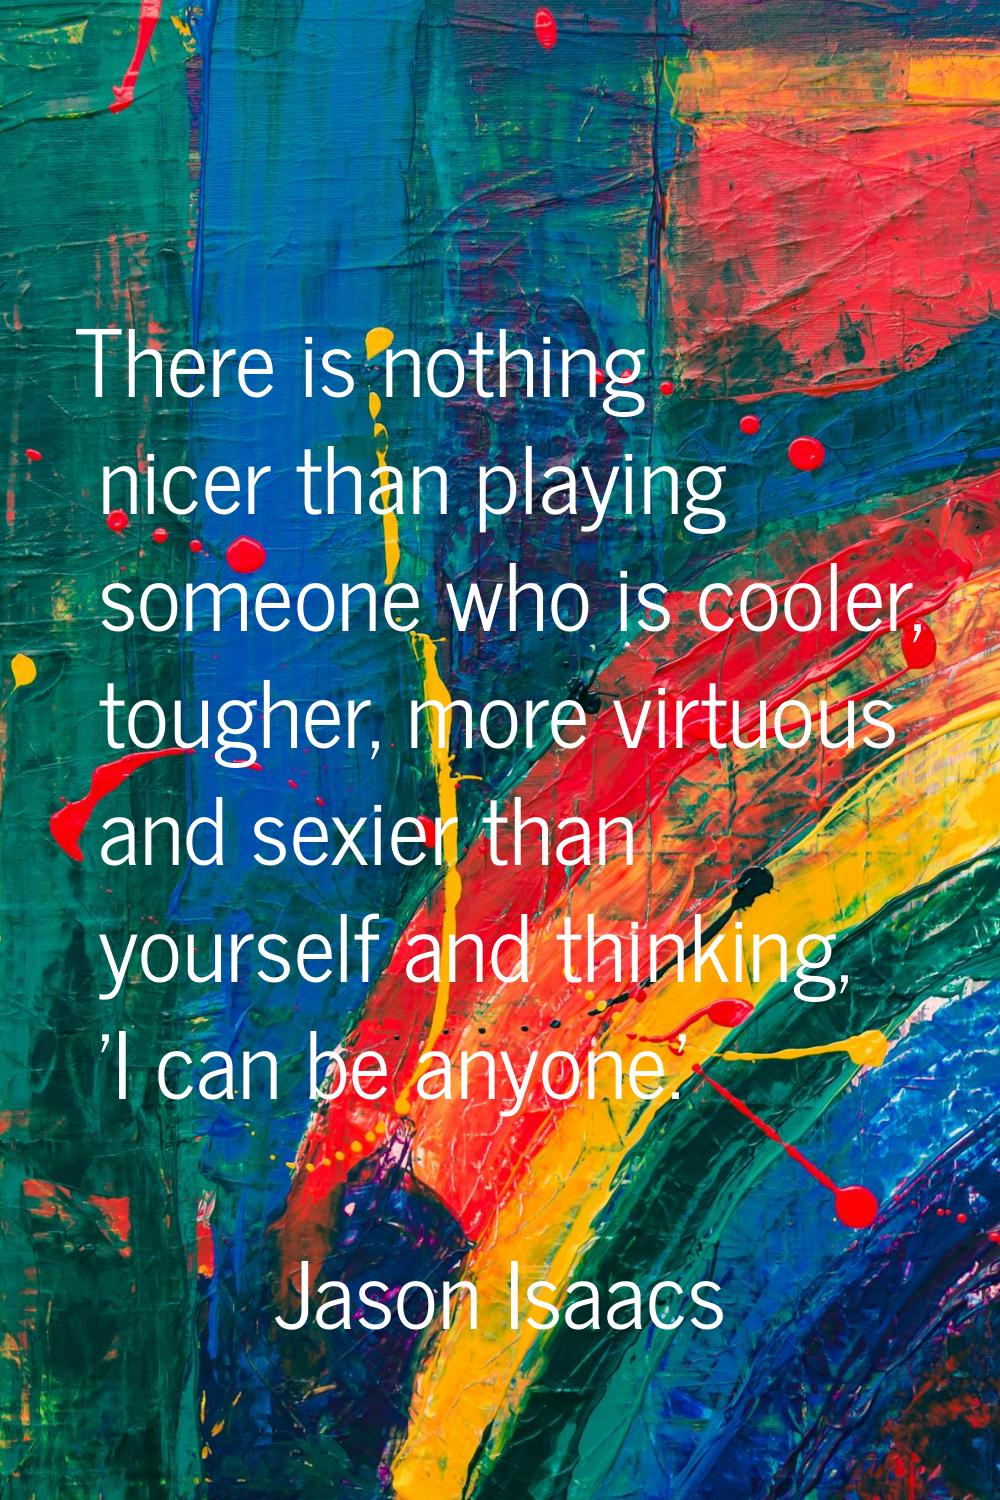 There is nothing nicer than playing someone who is cooler, tougher, more virtuous and sexier than y